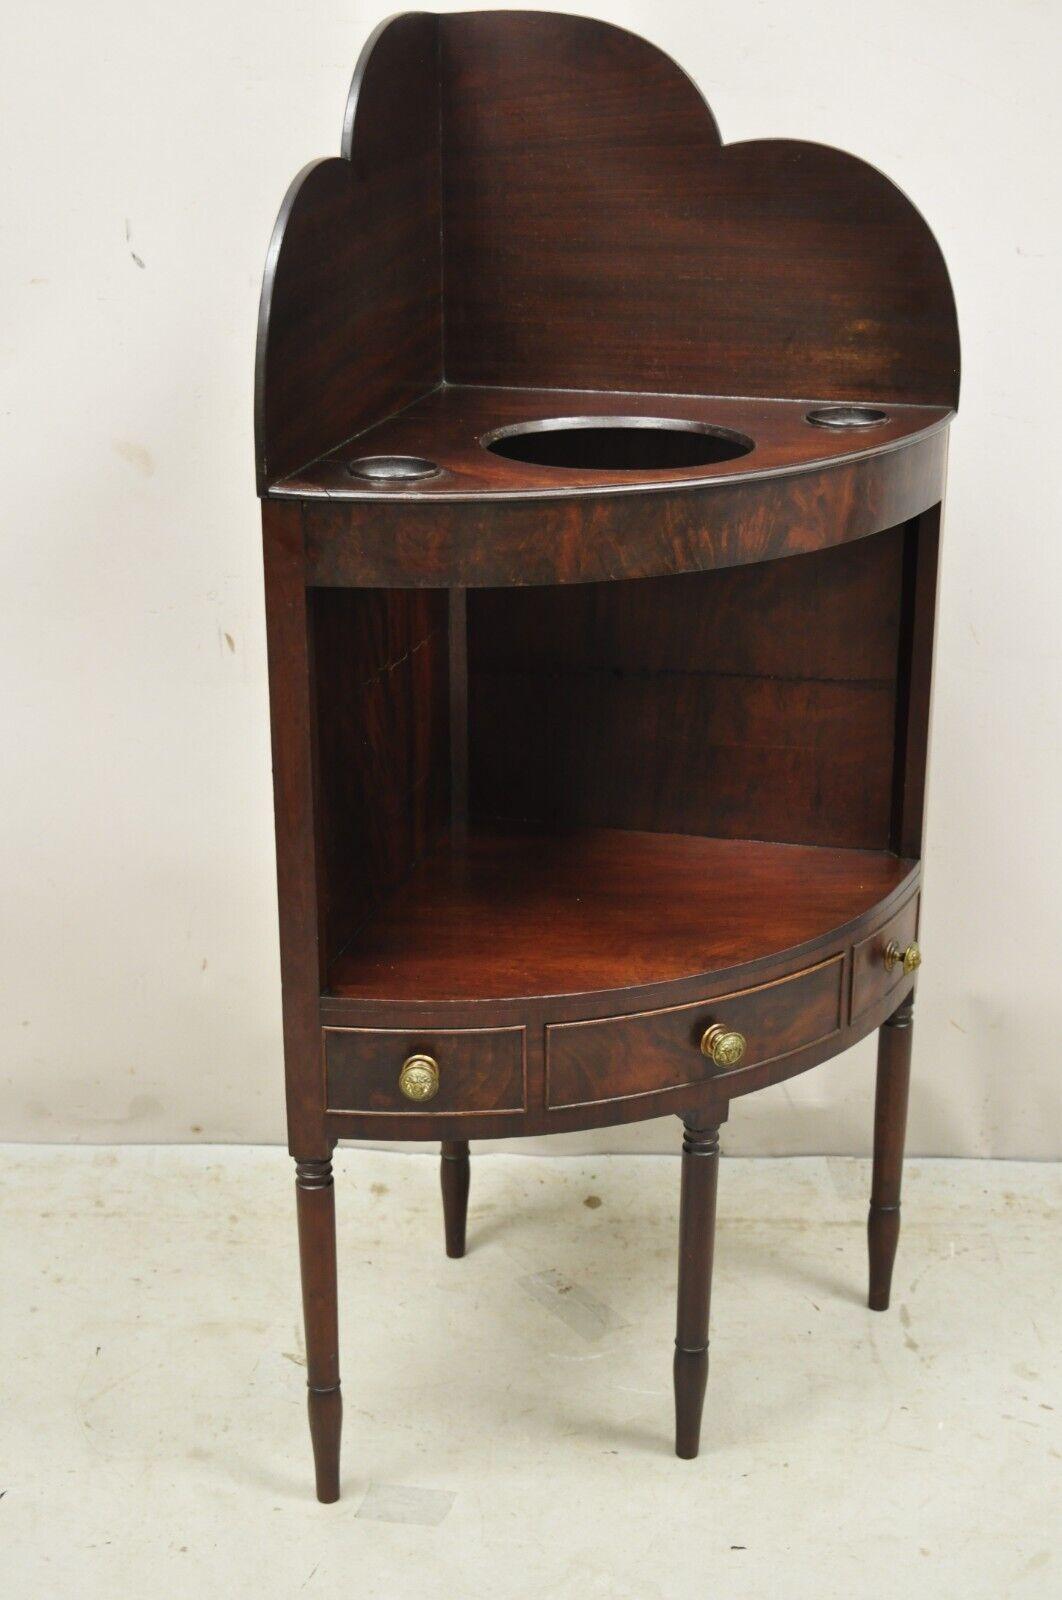 Antique Georgian Mahogany Corner Washstand Side Table with Drawer. Circa 19th Century. Measurements: 44